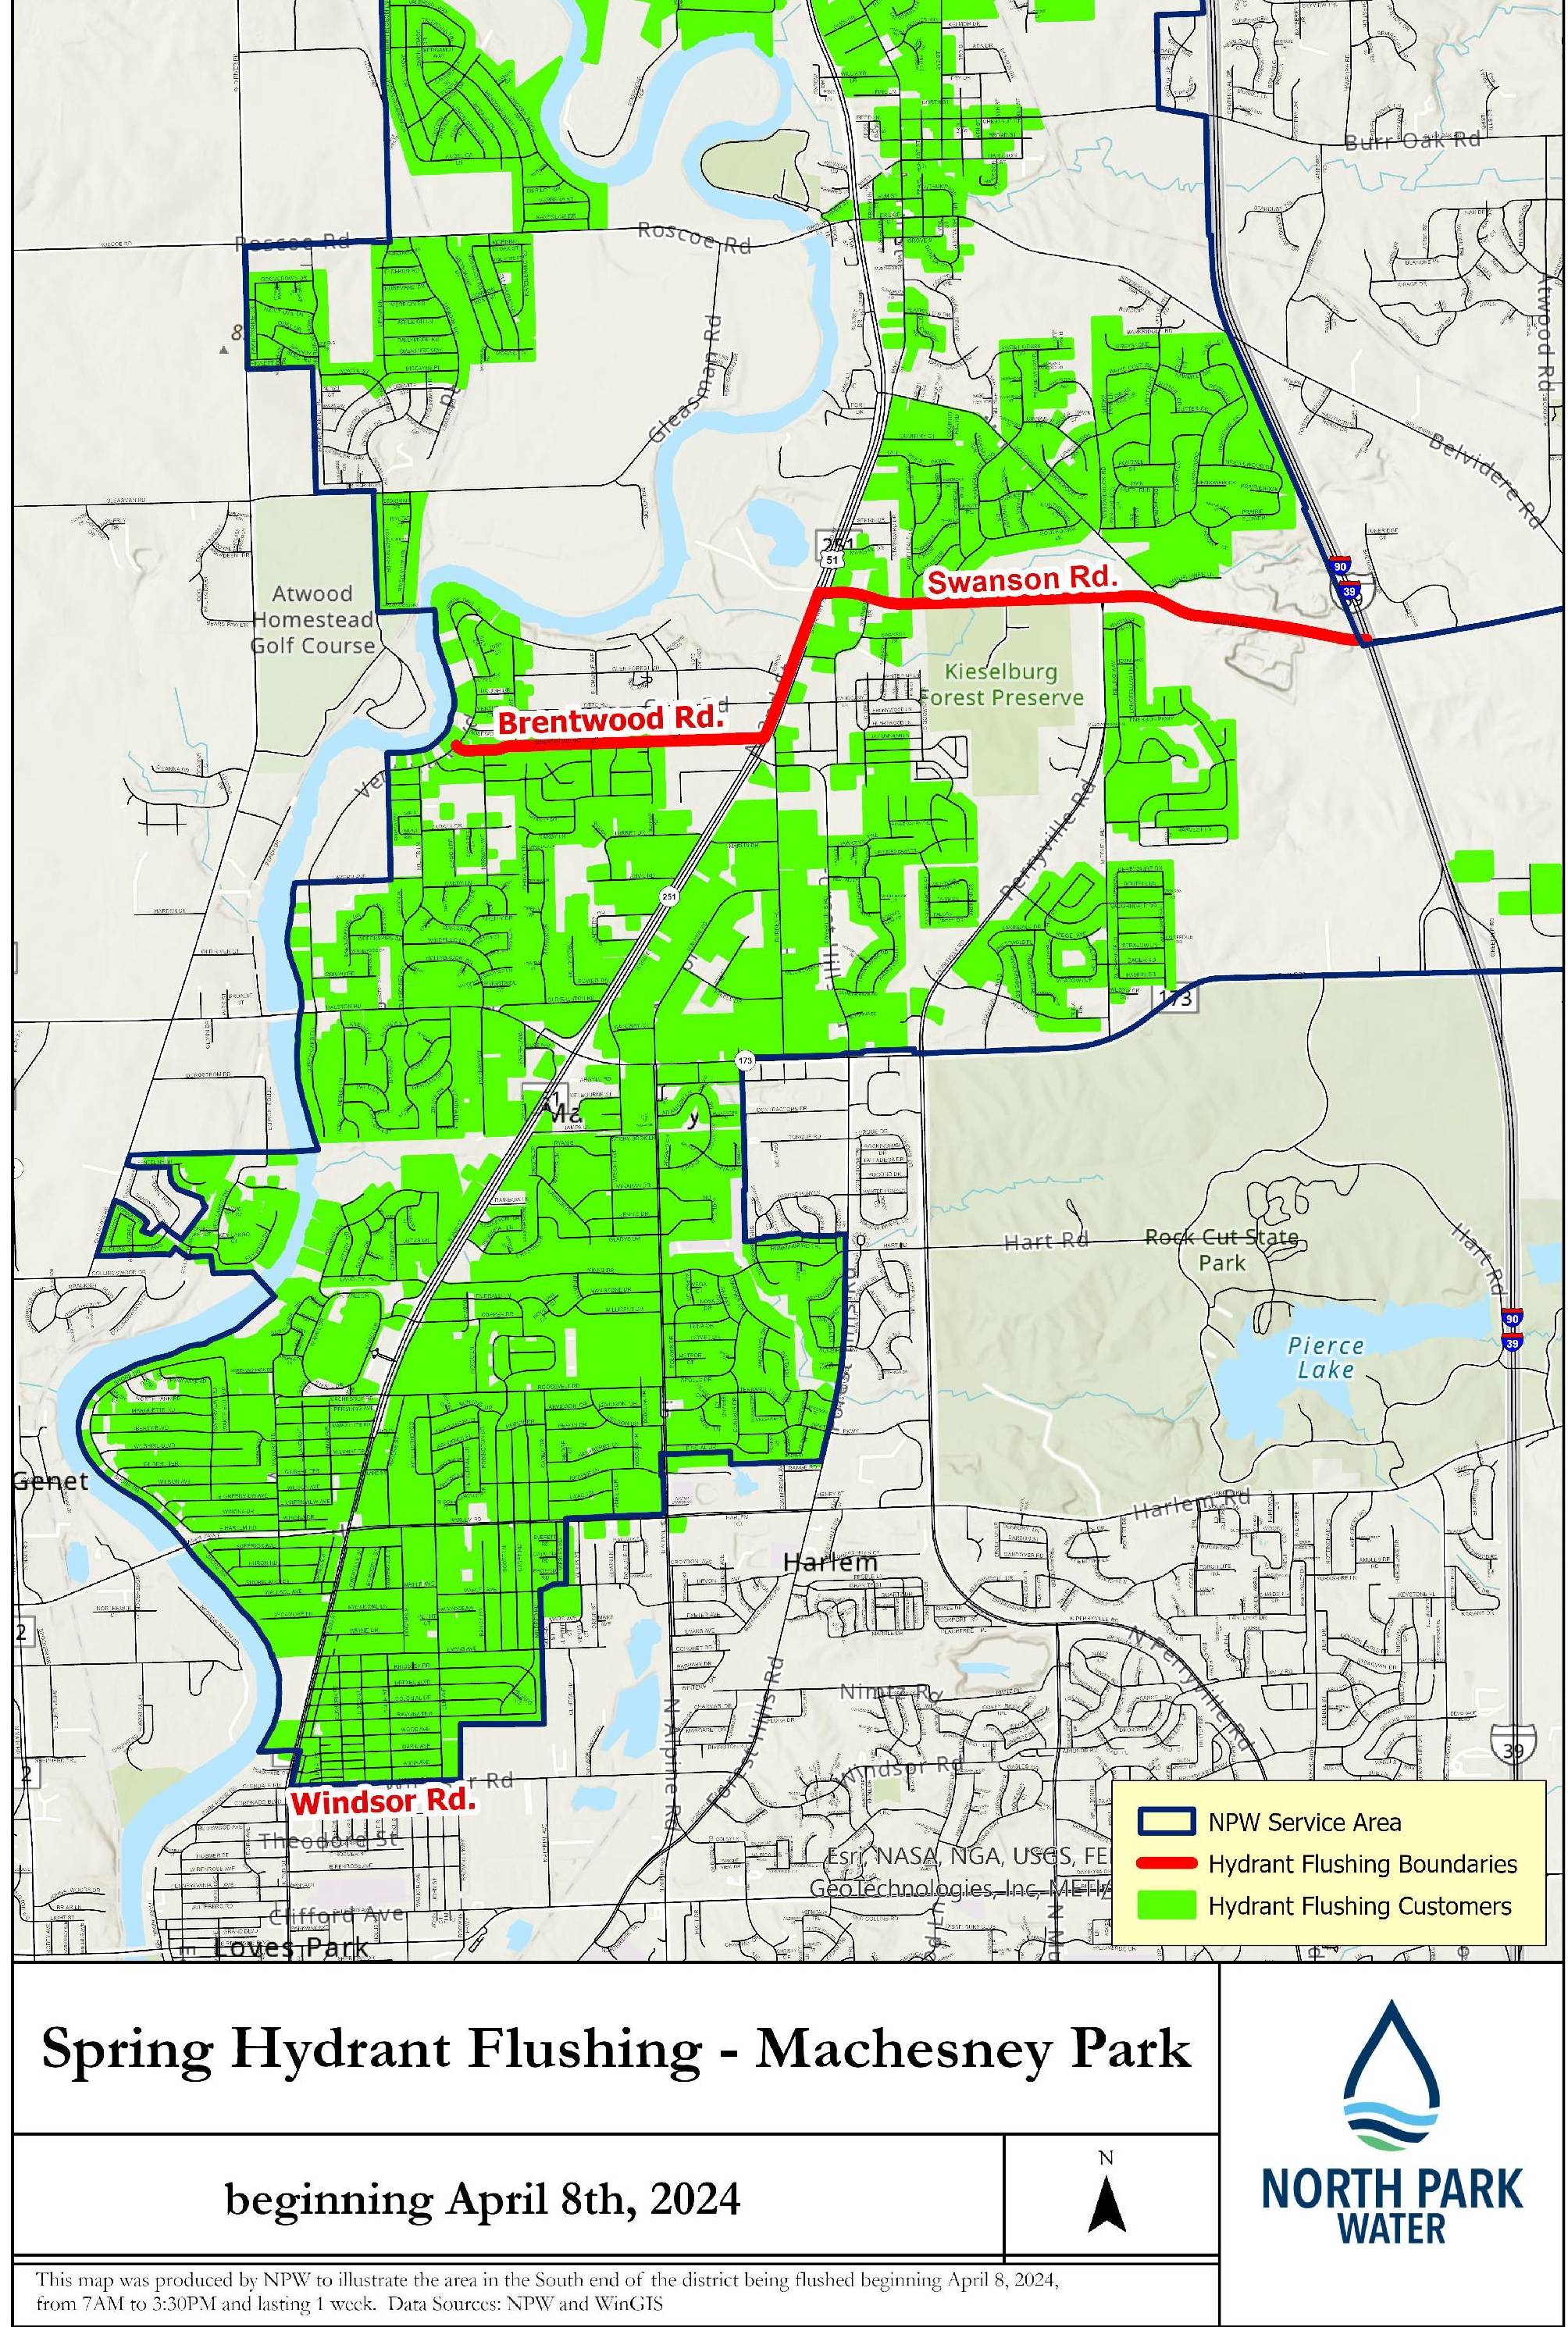 North Park Public Water District 2024 Spring Hydrant Flushing Map - Machesney Park - Copy